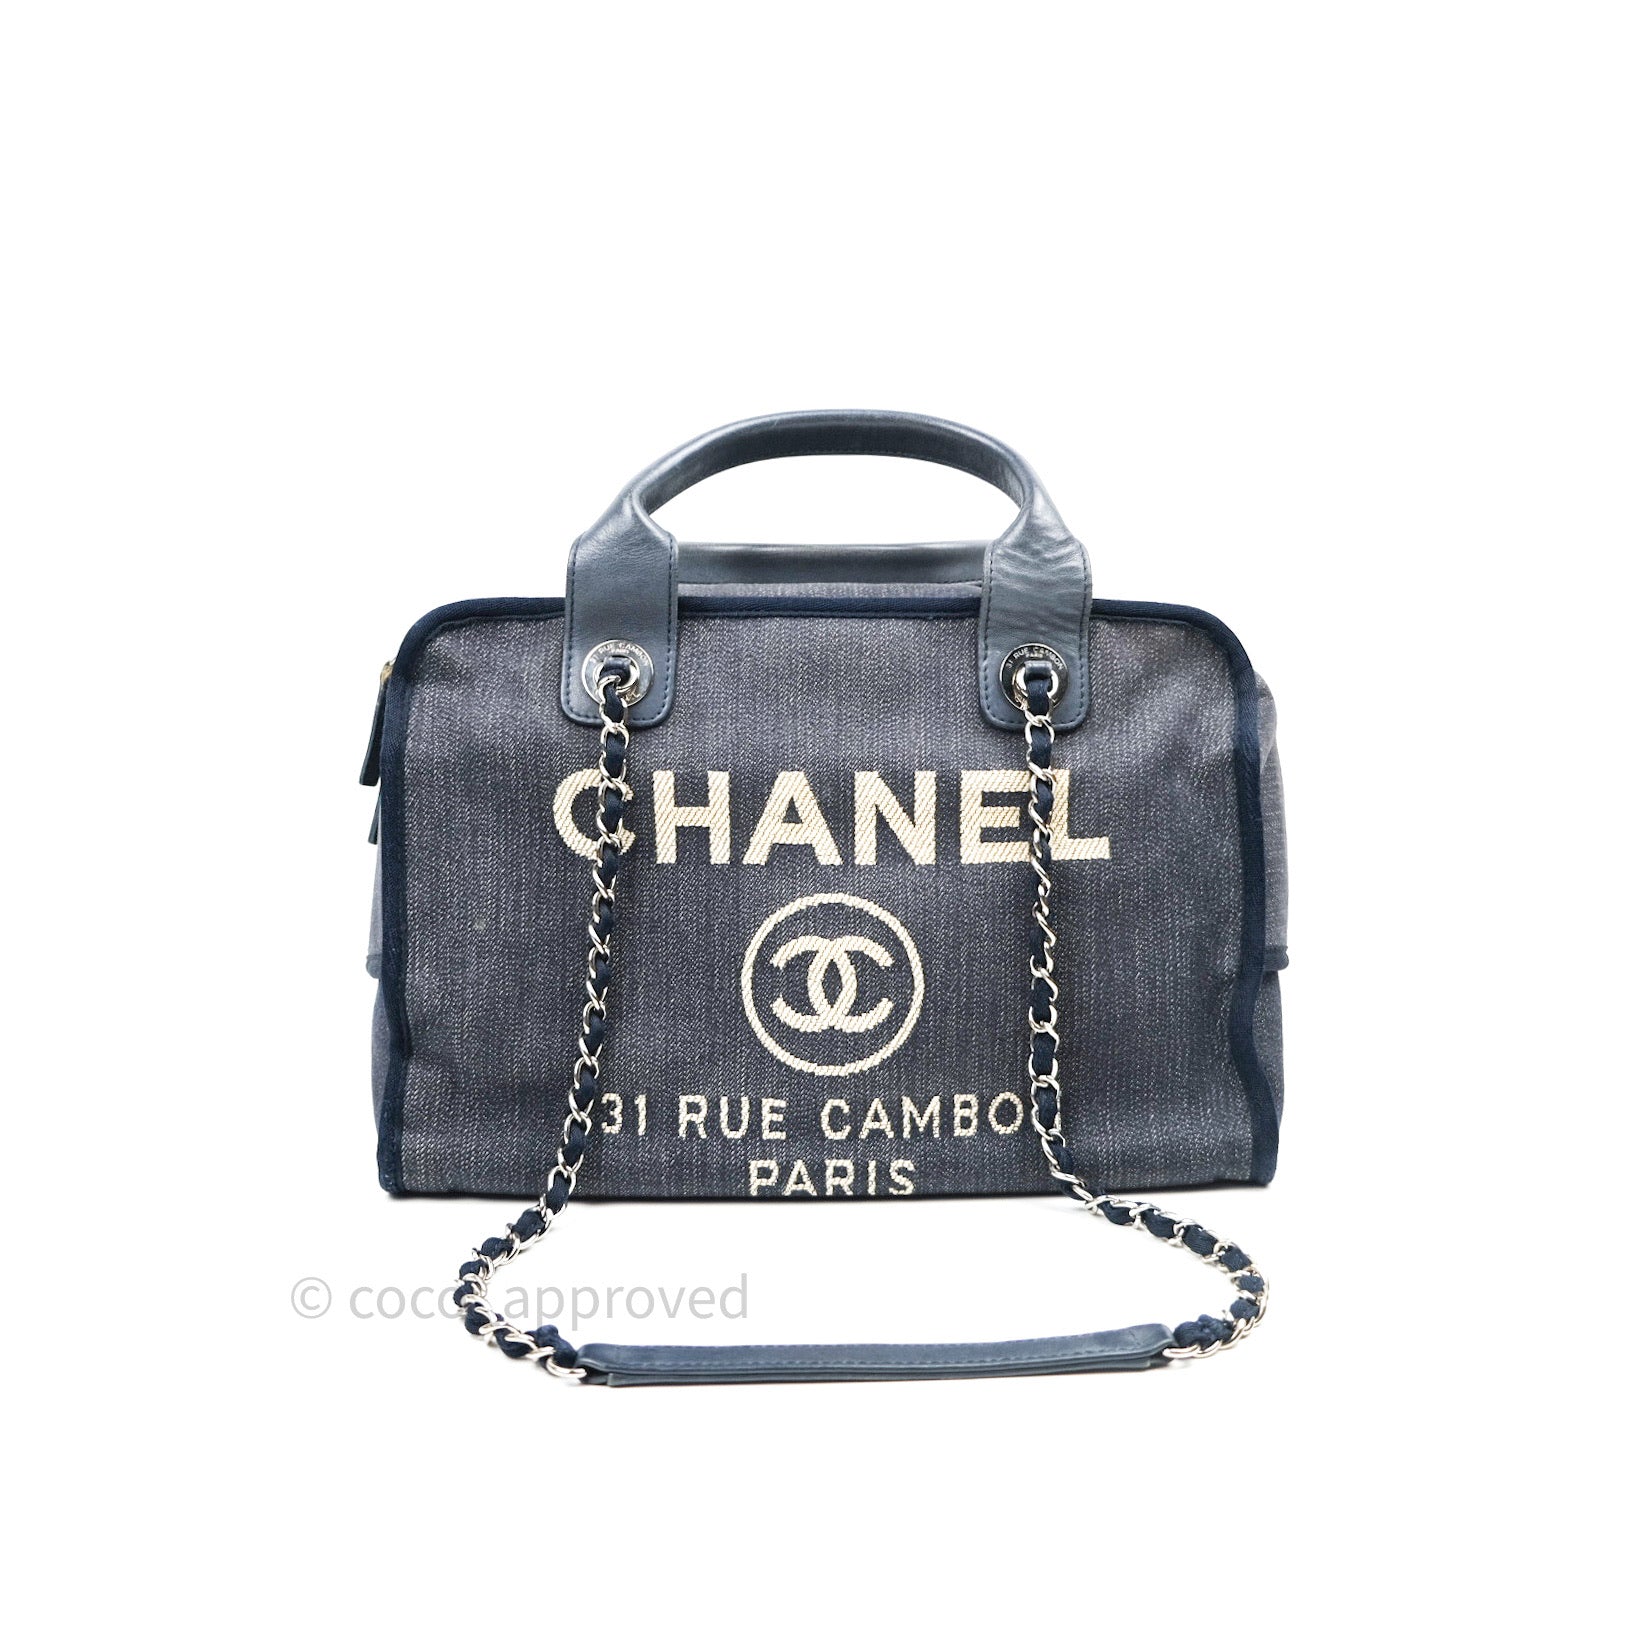 Chanel Navy Deauville Bowling bag